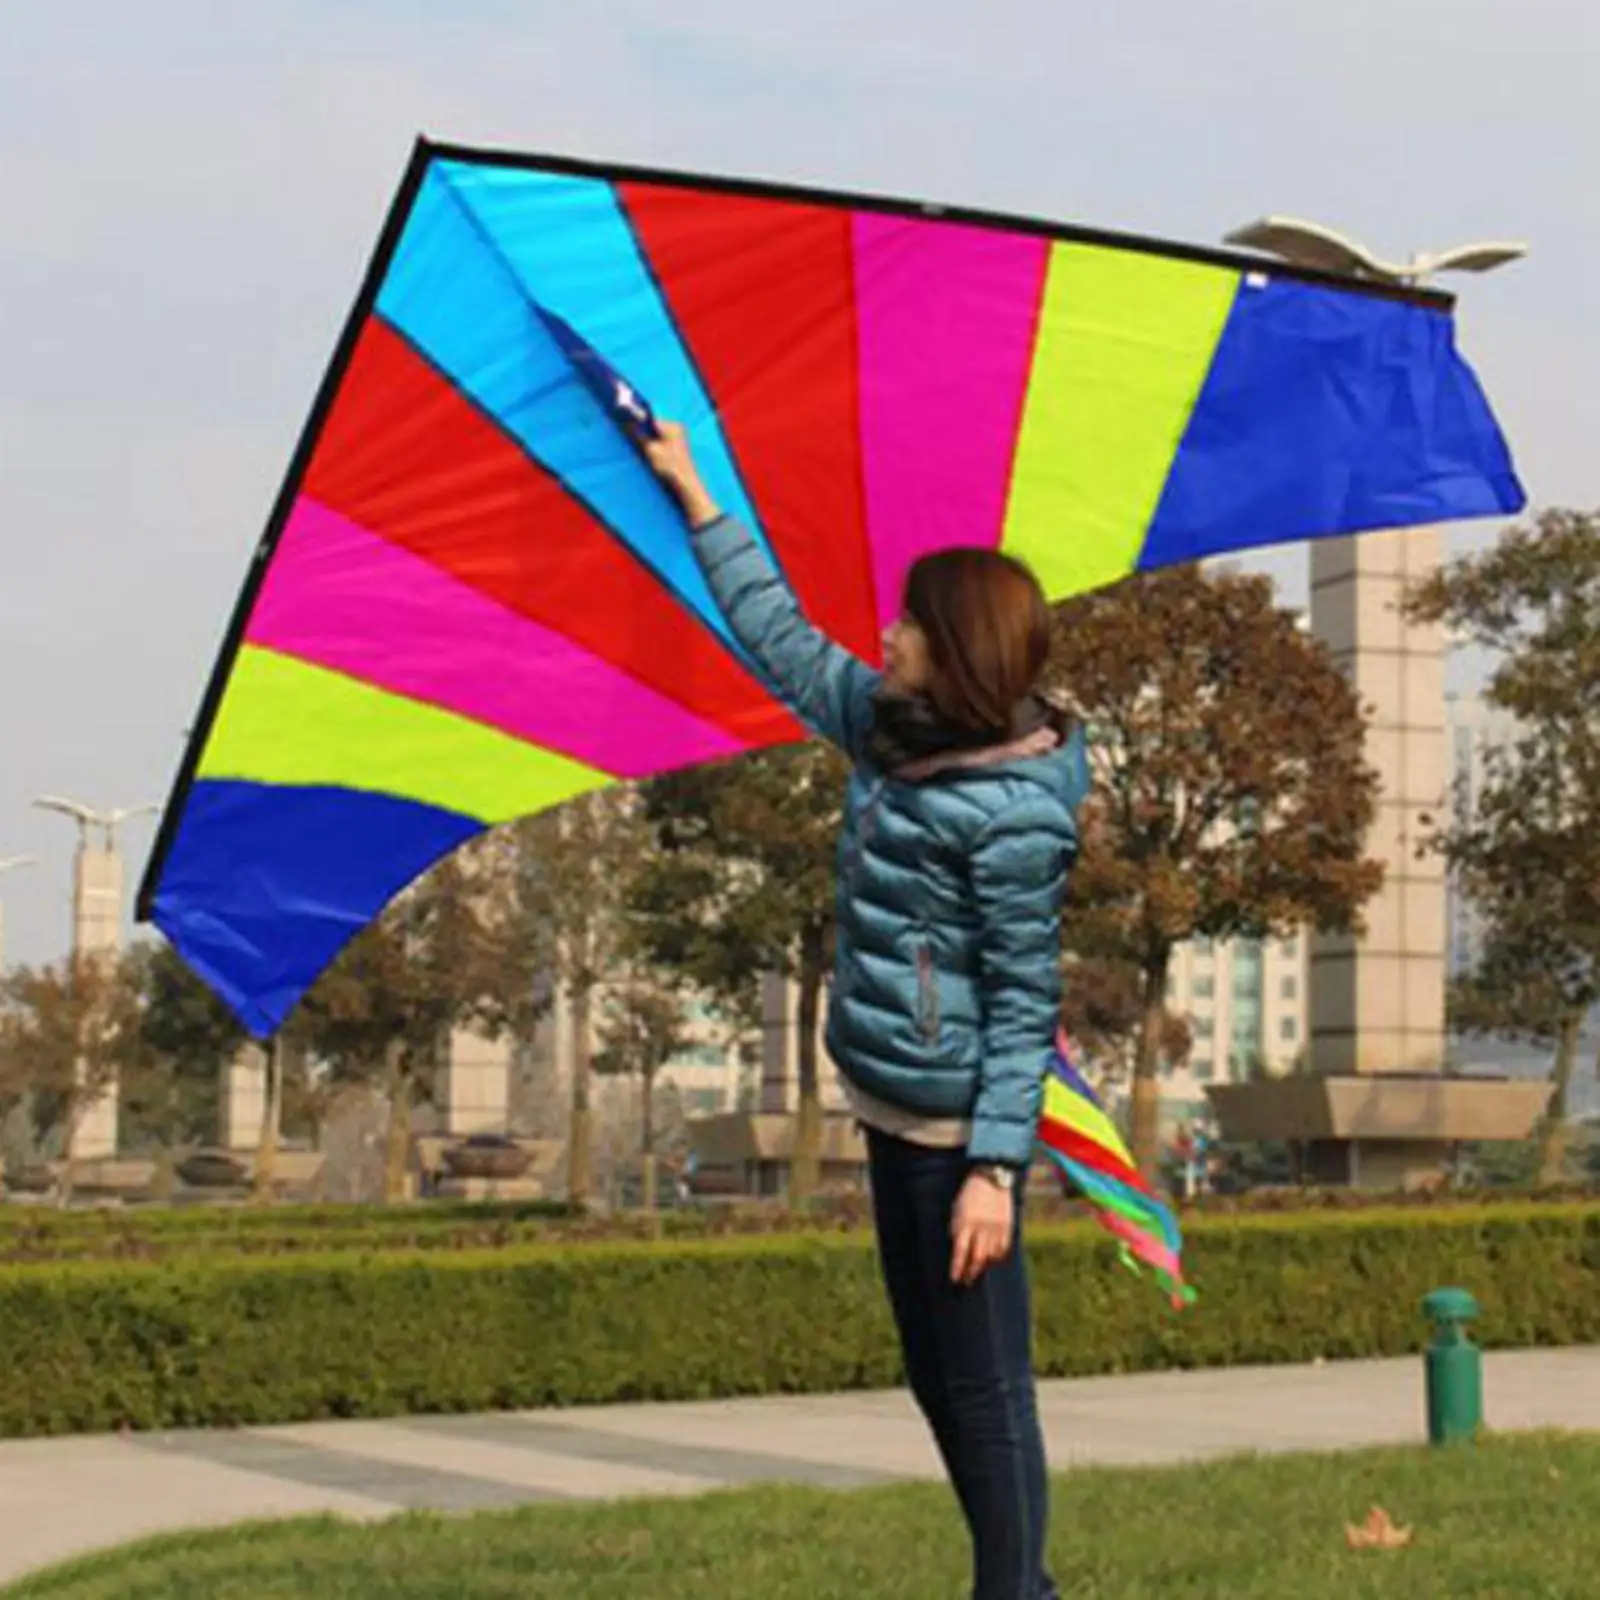 Large Delta Kite with String Easy Huge Windsock Rainbow for Family Trips Activities Beginner